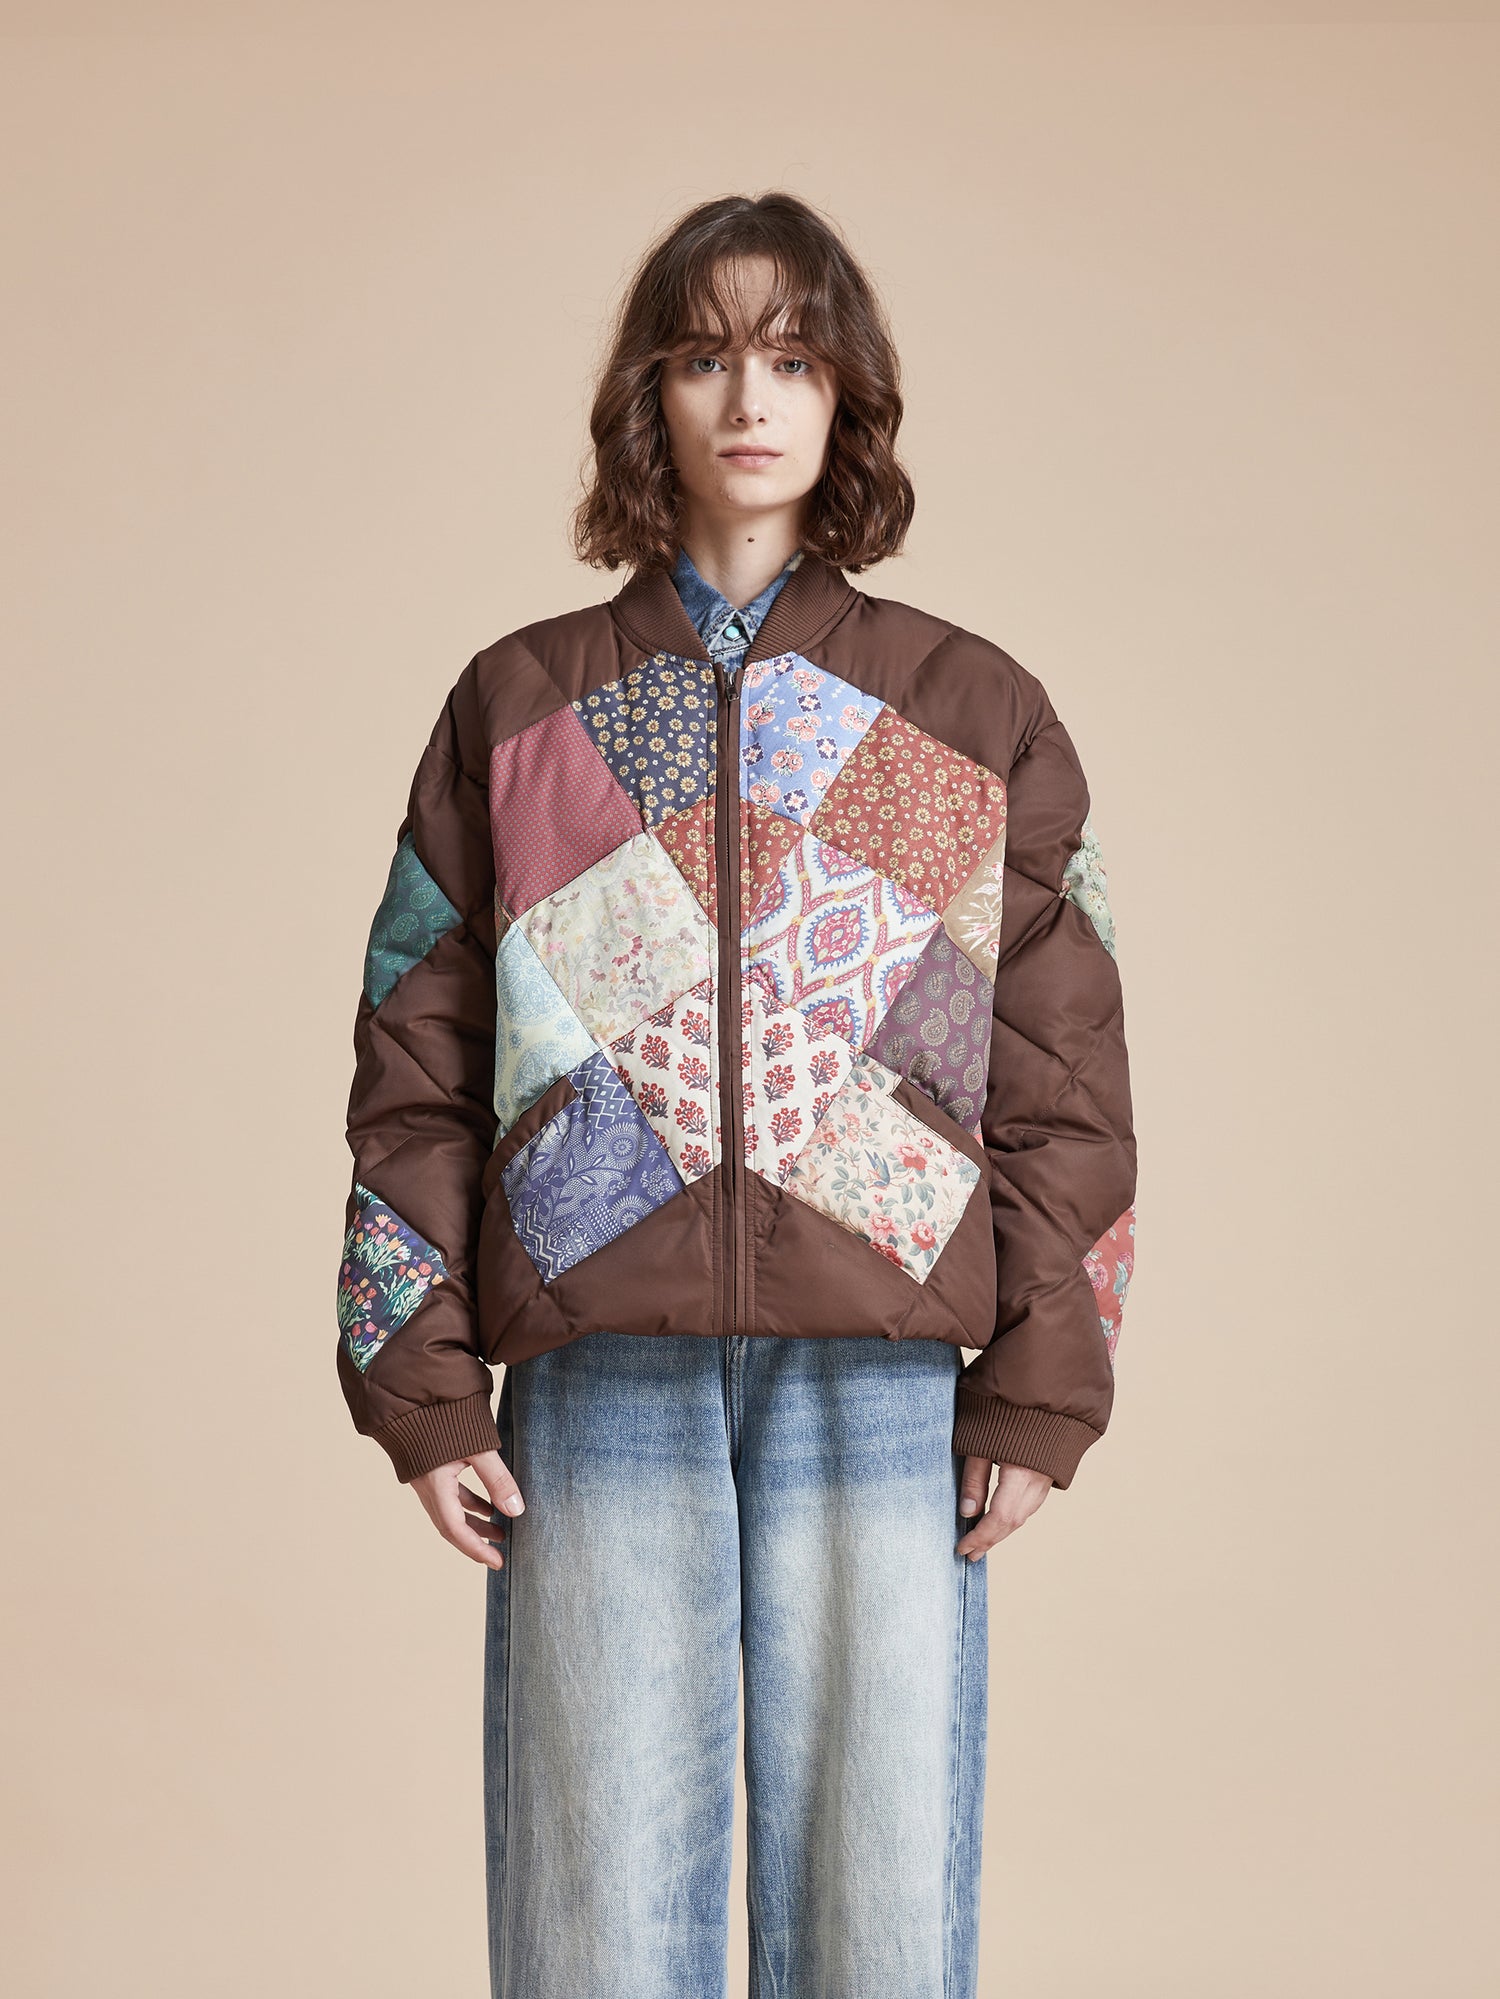 A woman wearing a Found Diamond Quilt Patchwork Jacket and jeans.